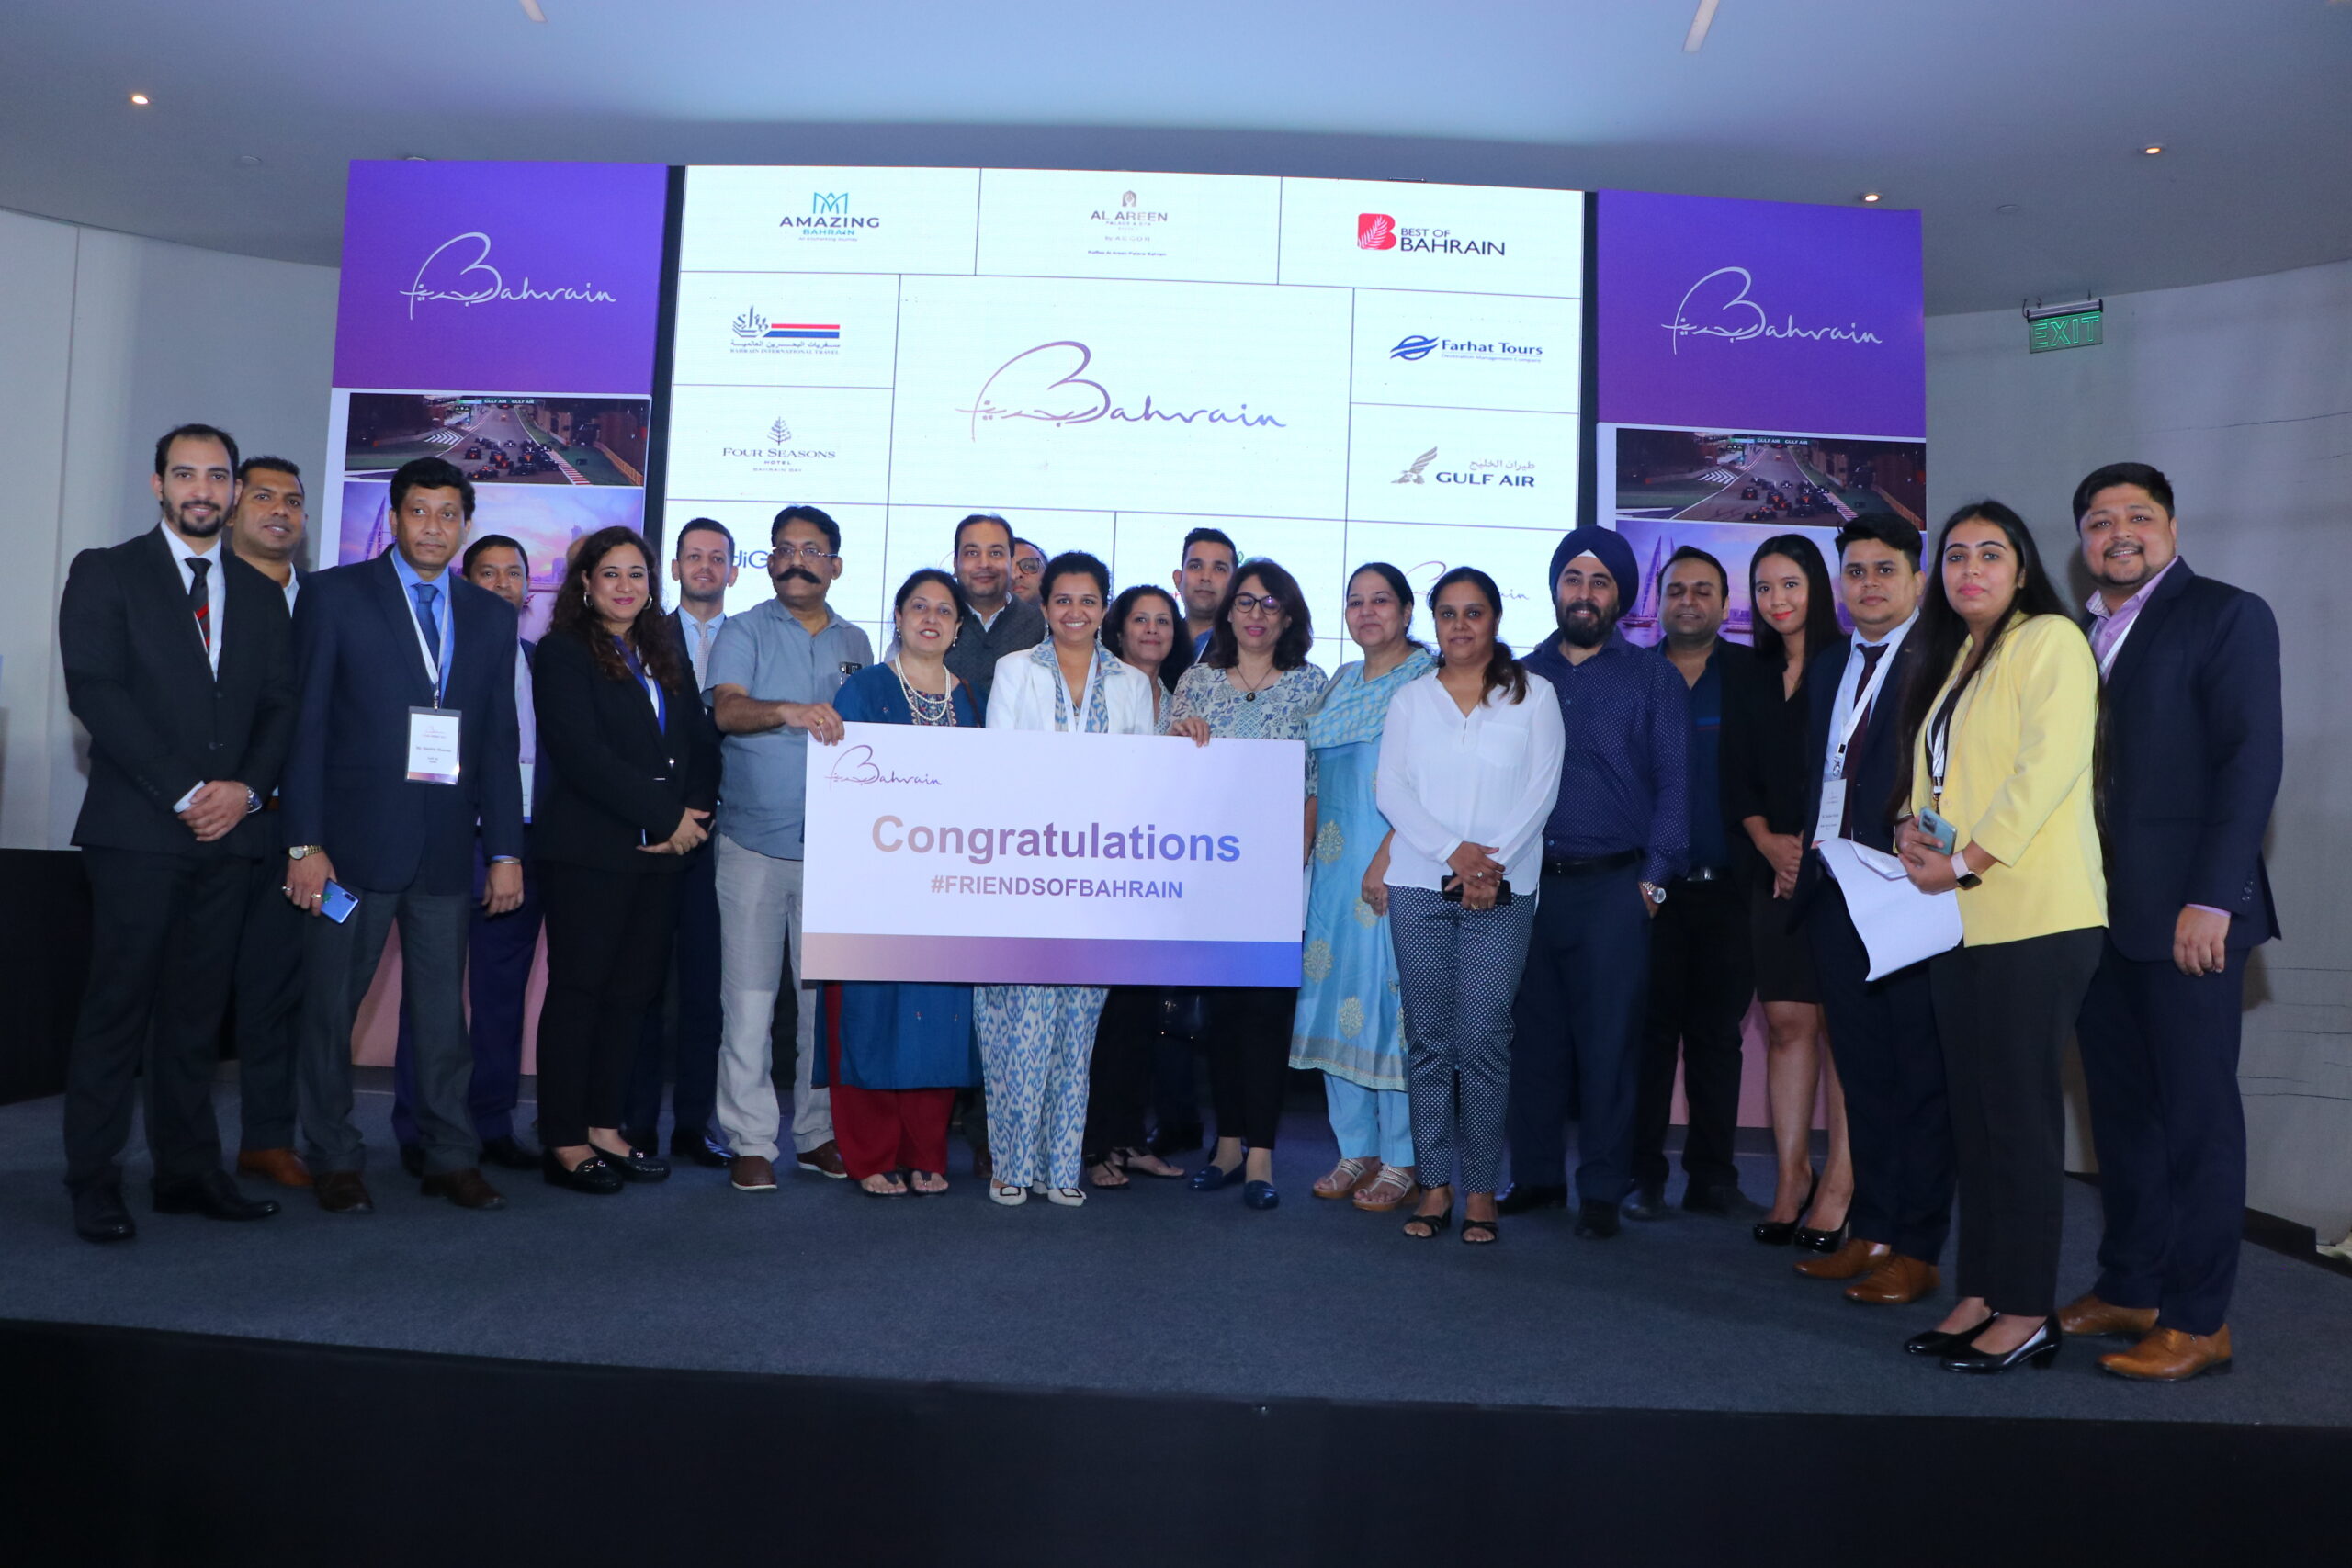 Bahrain Tourism and Exhibitions Authority targets leisure, MICE, weddings segments in India through its four-city roadshow